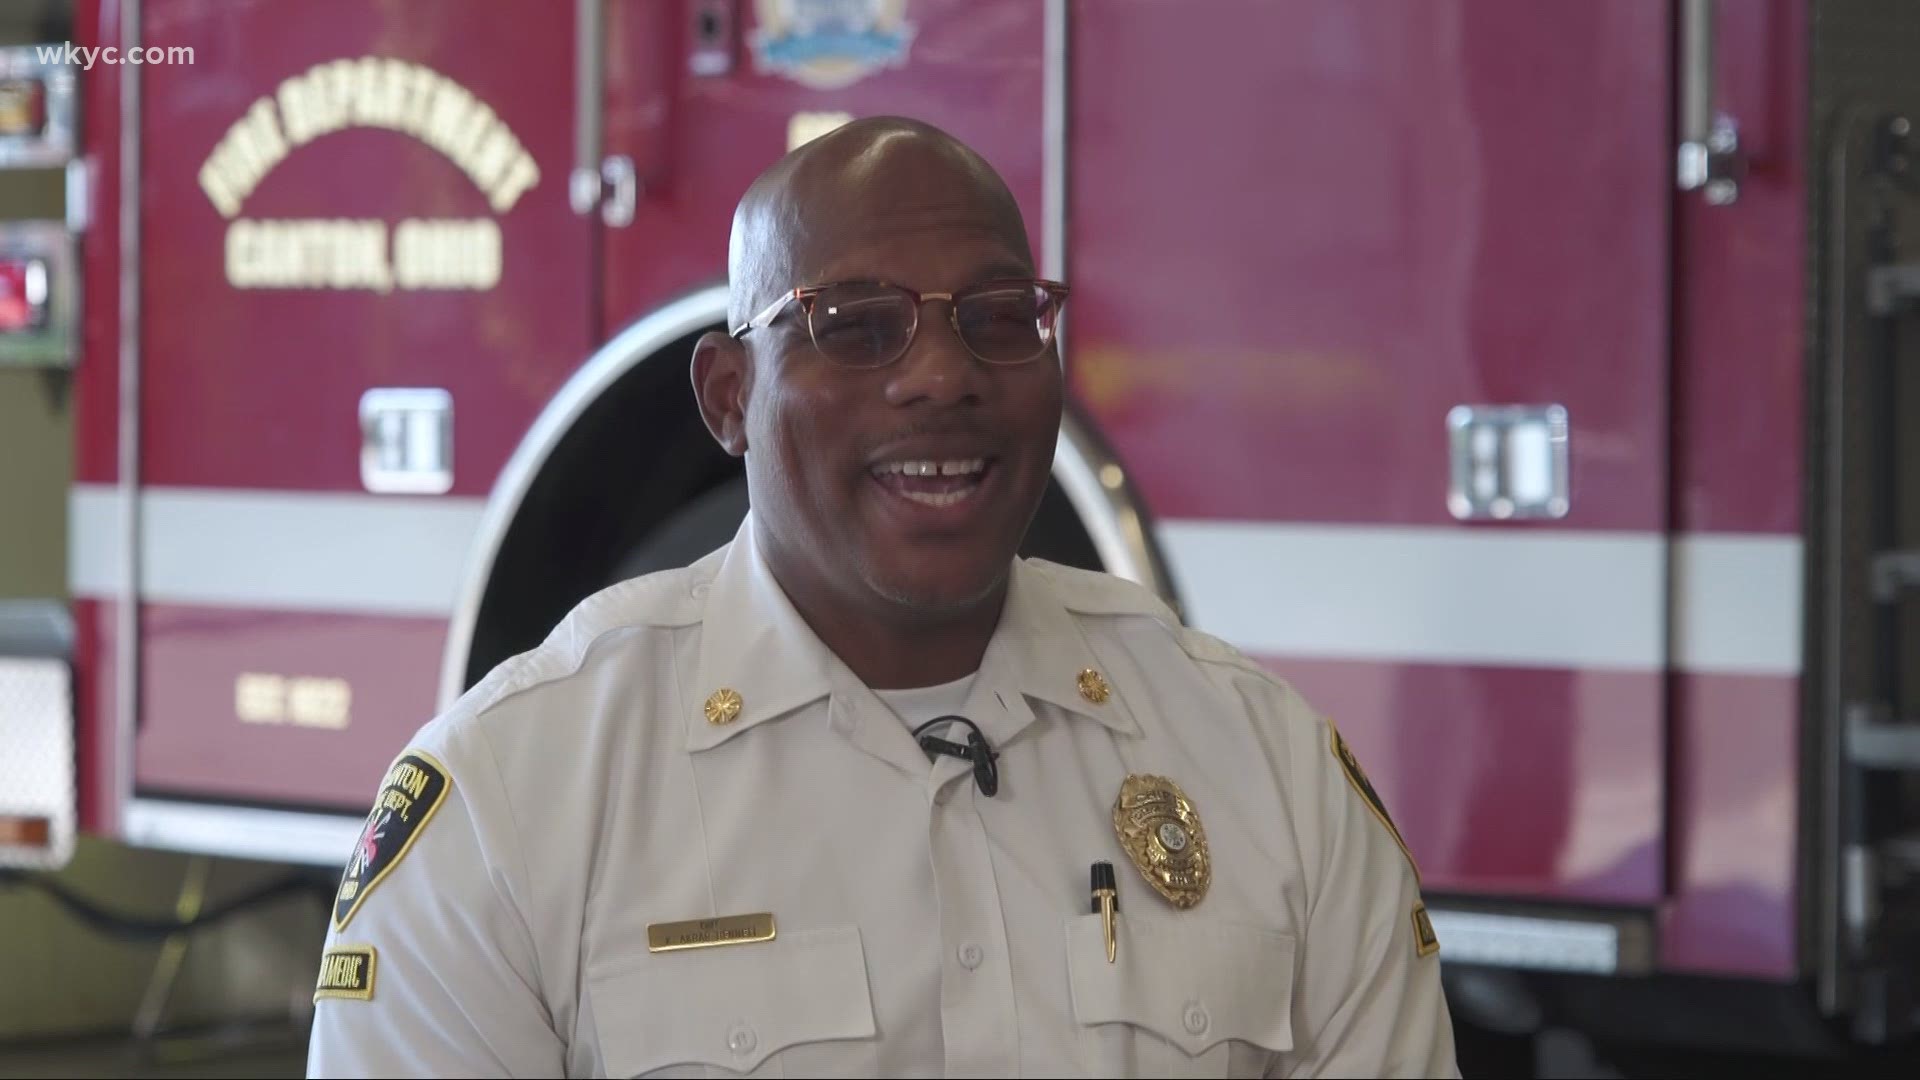 We sit down for a conversation with Canton's first Black fire chief to discuss his life and plans for the city.